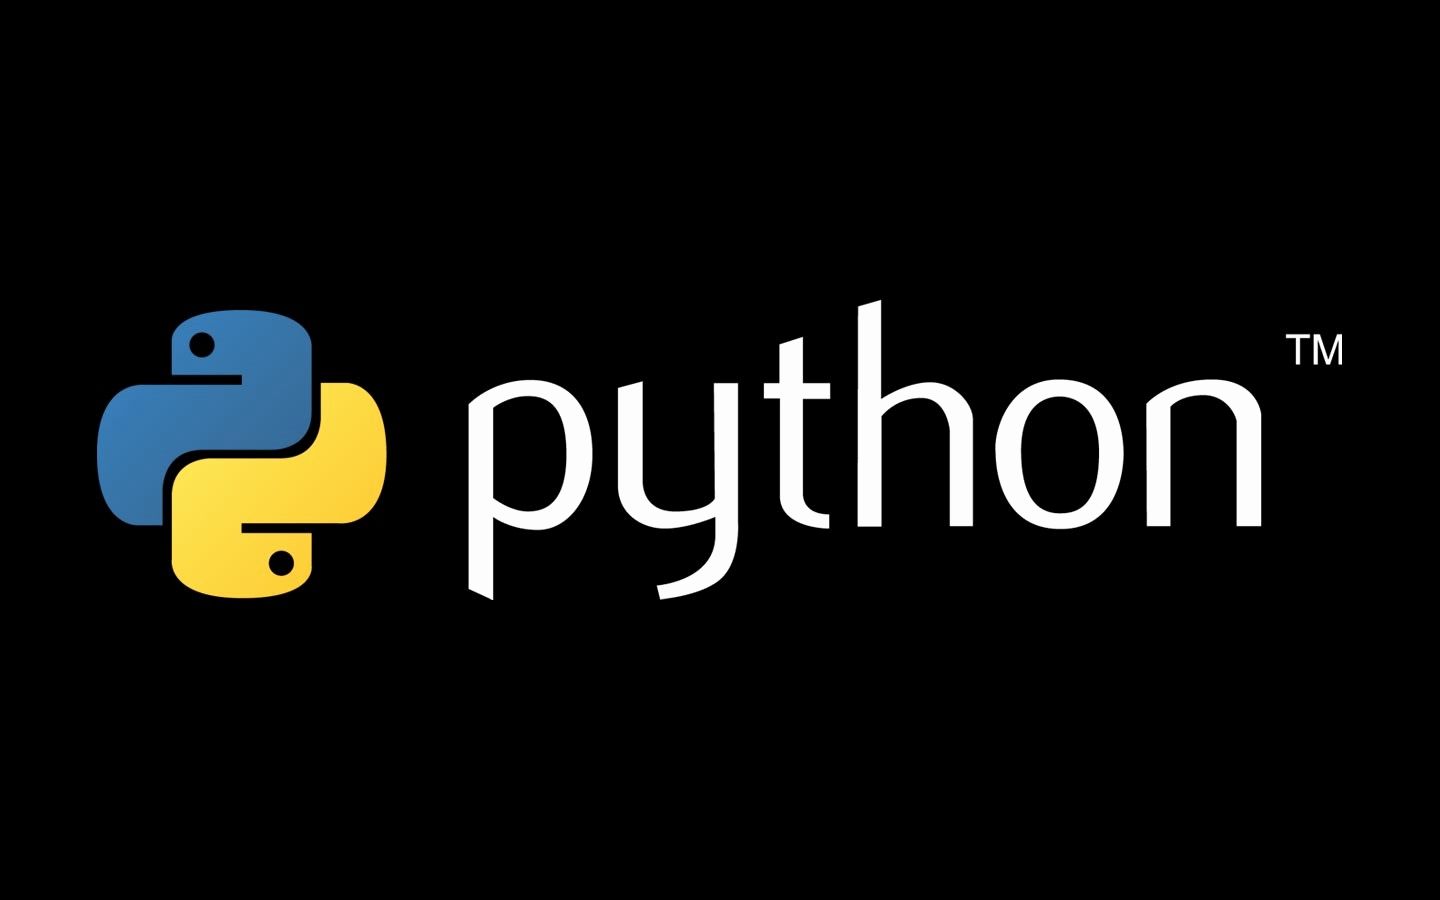 Python (Programming Language) wallpapers for desktop, download free Python ( Programming Language) pictures and backgrounds for PC